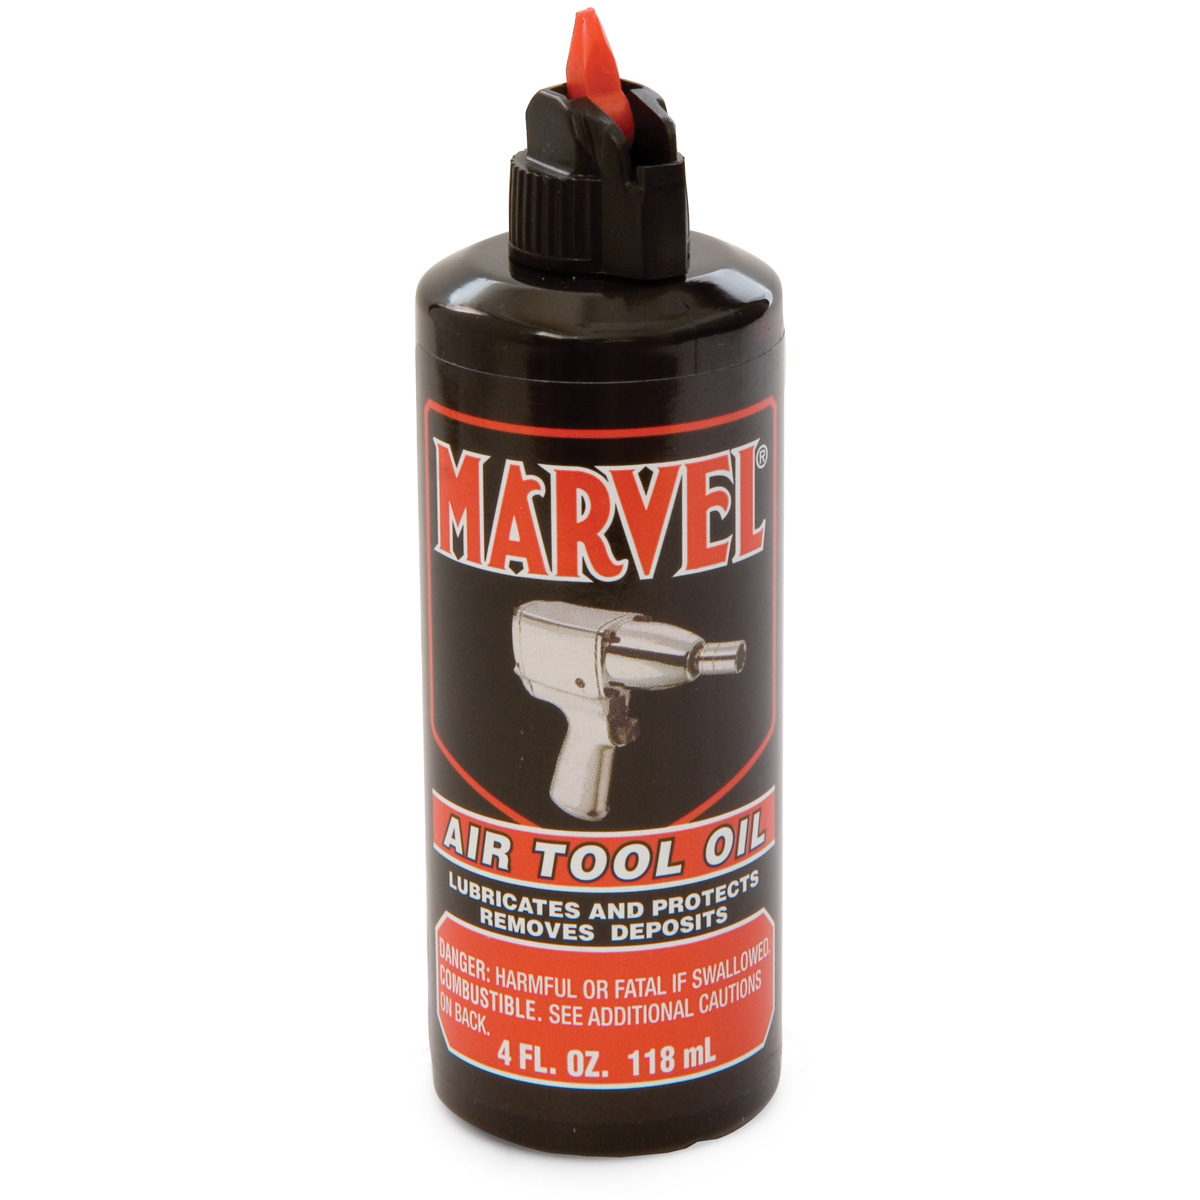 Marvel Air Tool Oil Kimball Midwest